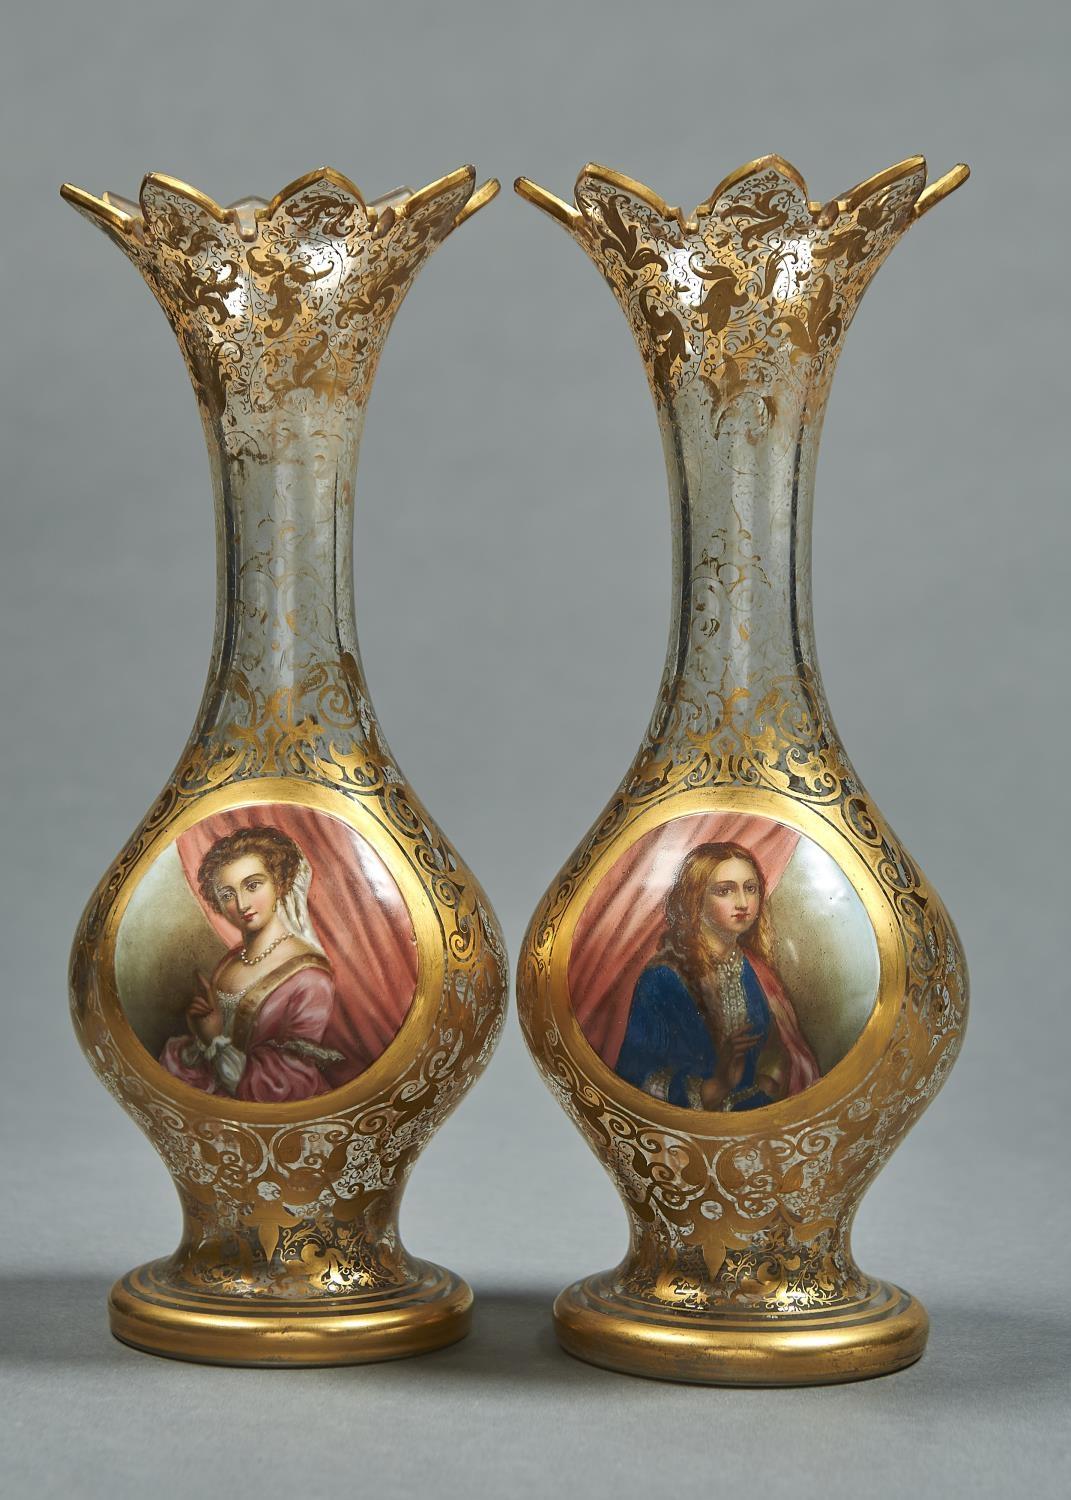 A PAIR OF BOHEMIAN OVERLAY GLASS BALUSTER VASES, C1860, PAINTED WITH A ROUND MEDALLION OF A YOUNG